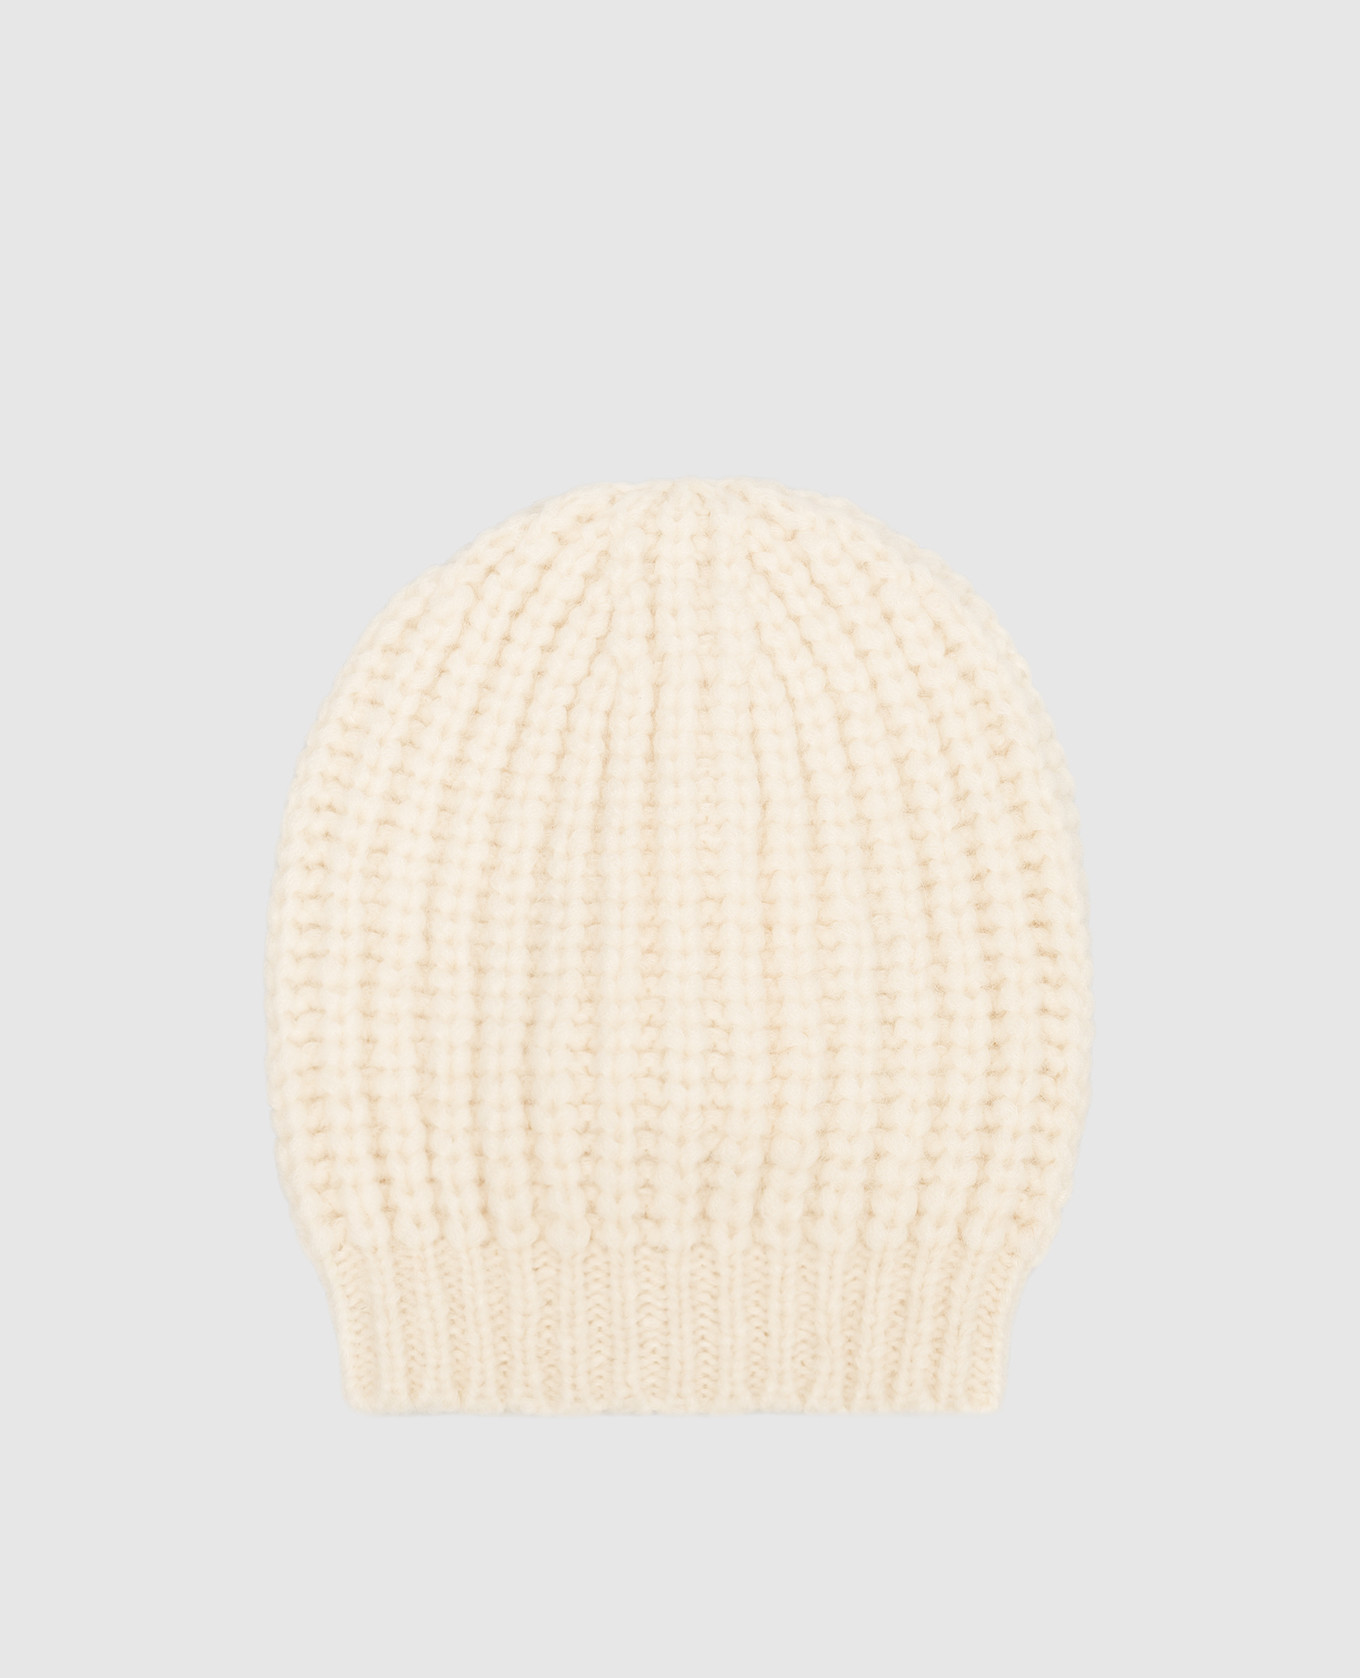 White cap in a textured pattern